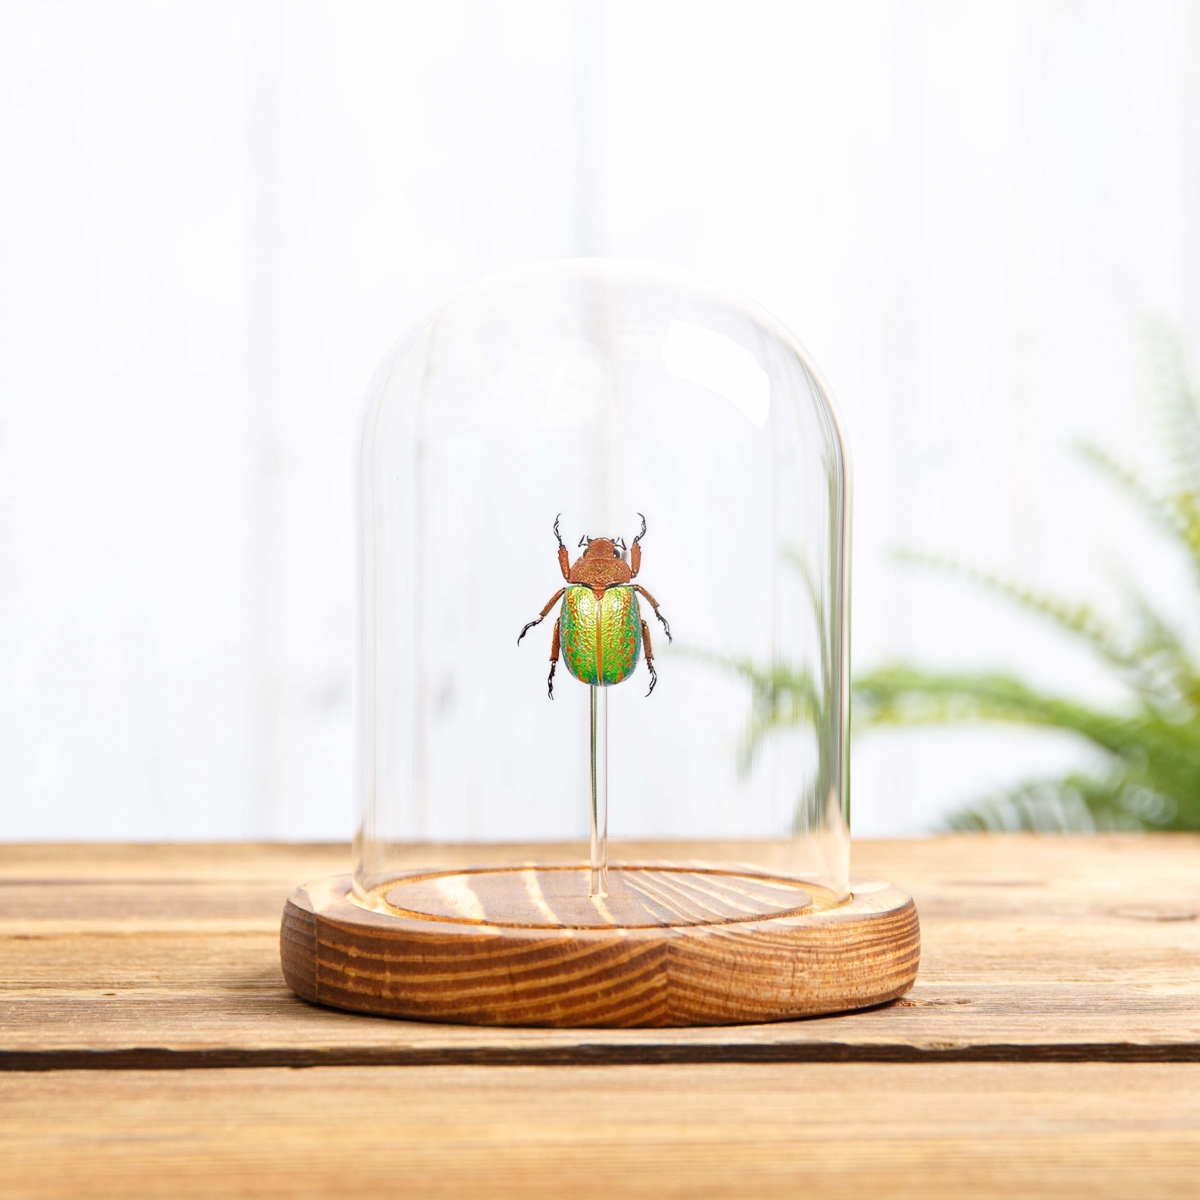 Jewel Scarab Beetle in Glass Dome with Wooden Base (Plusiotis victorina)